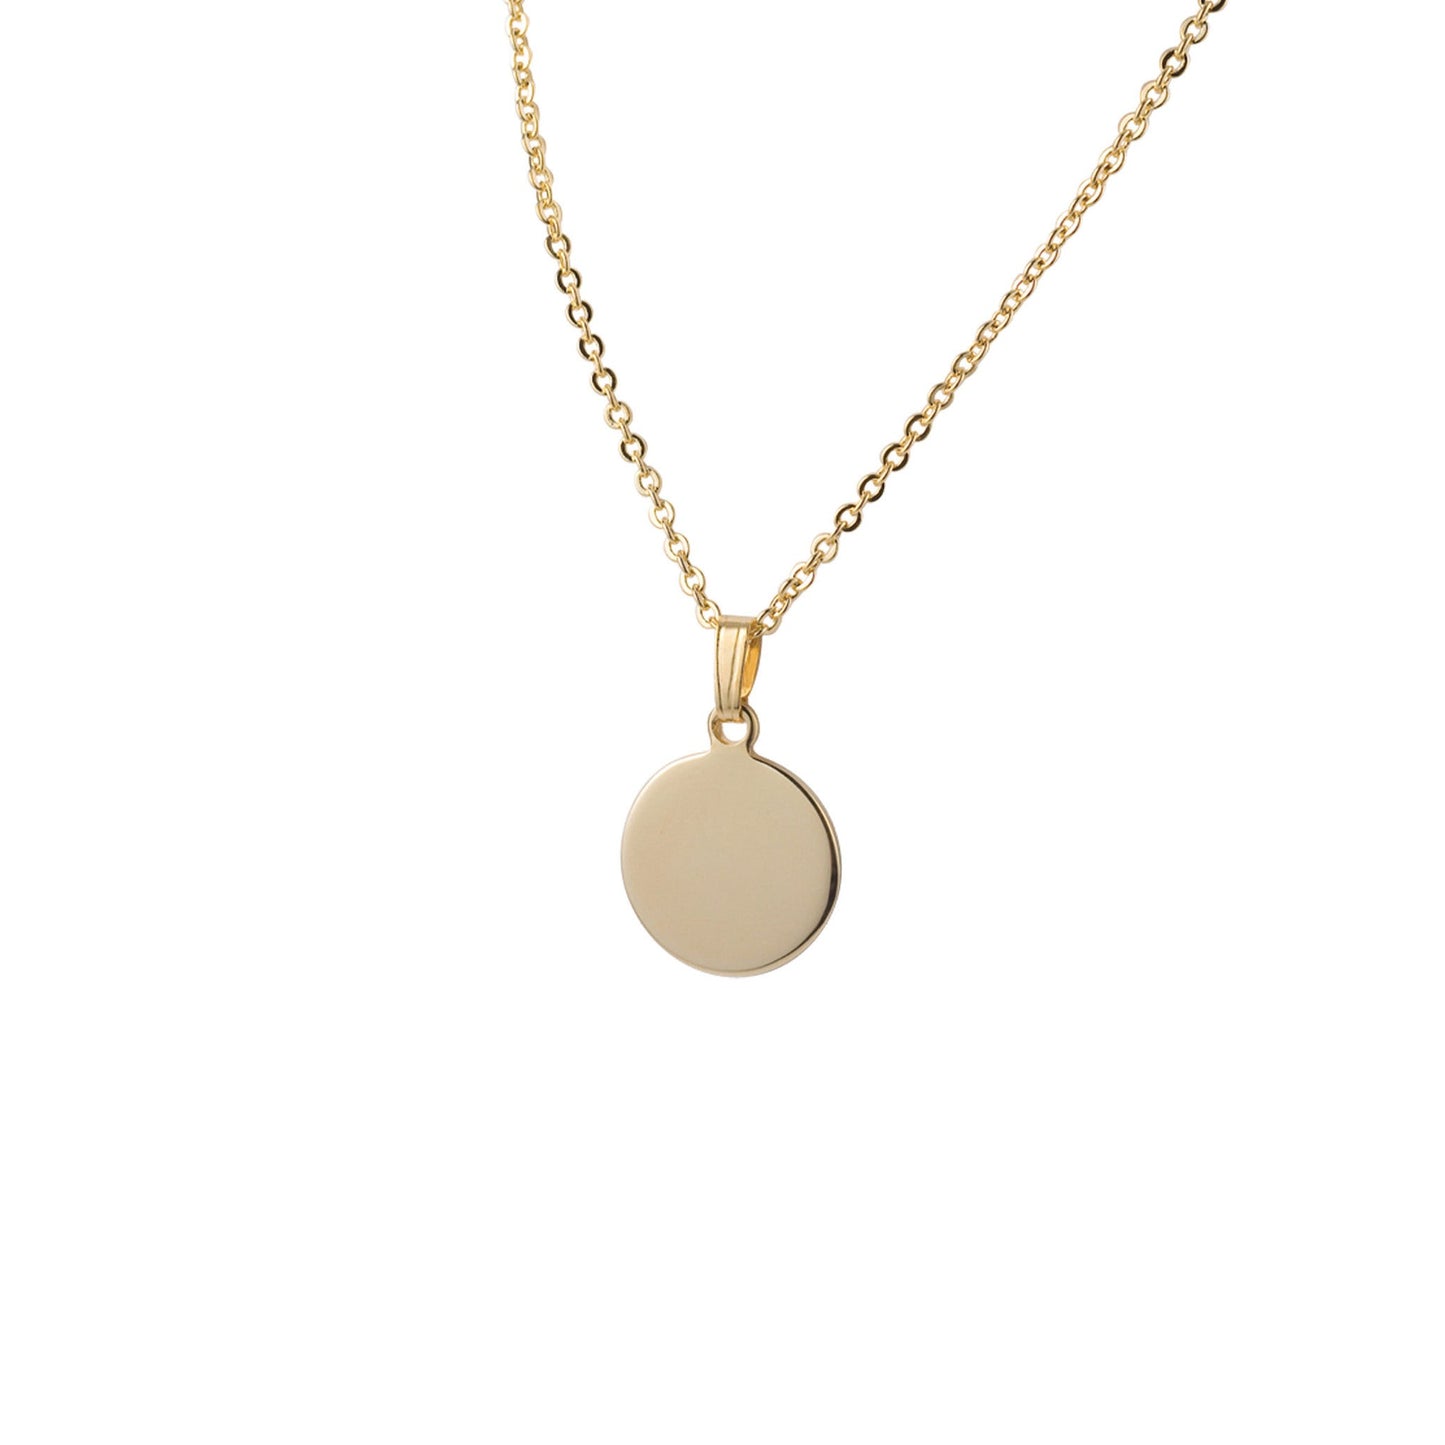 A round necklace necklace displayed on a neutral white background.